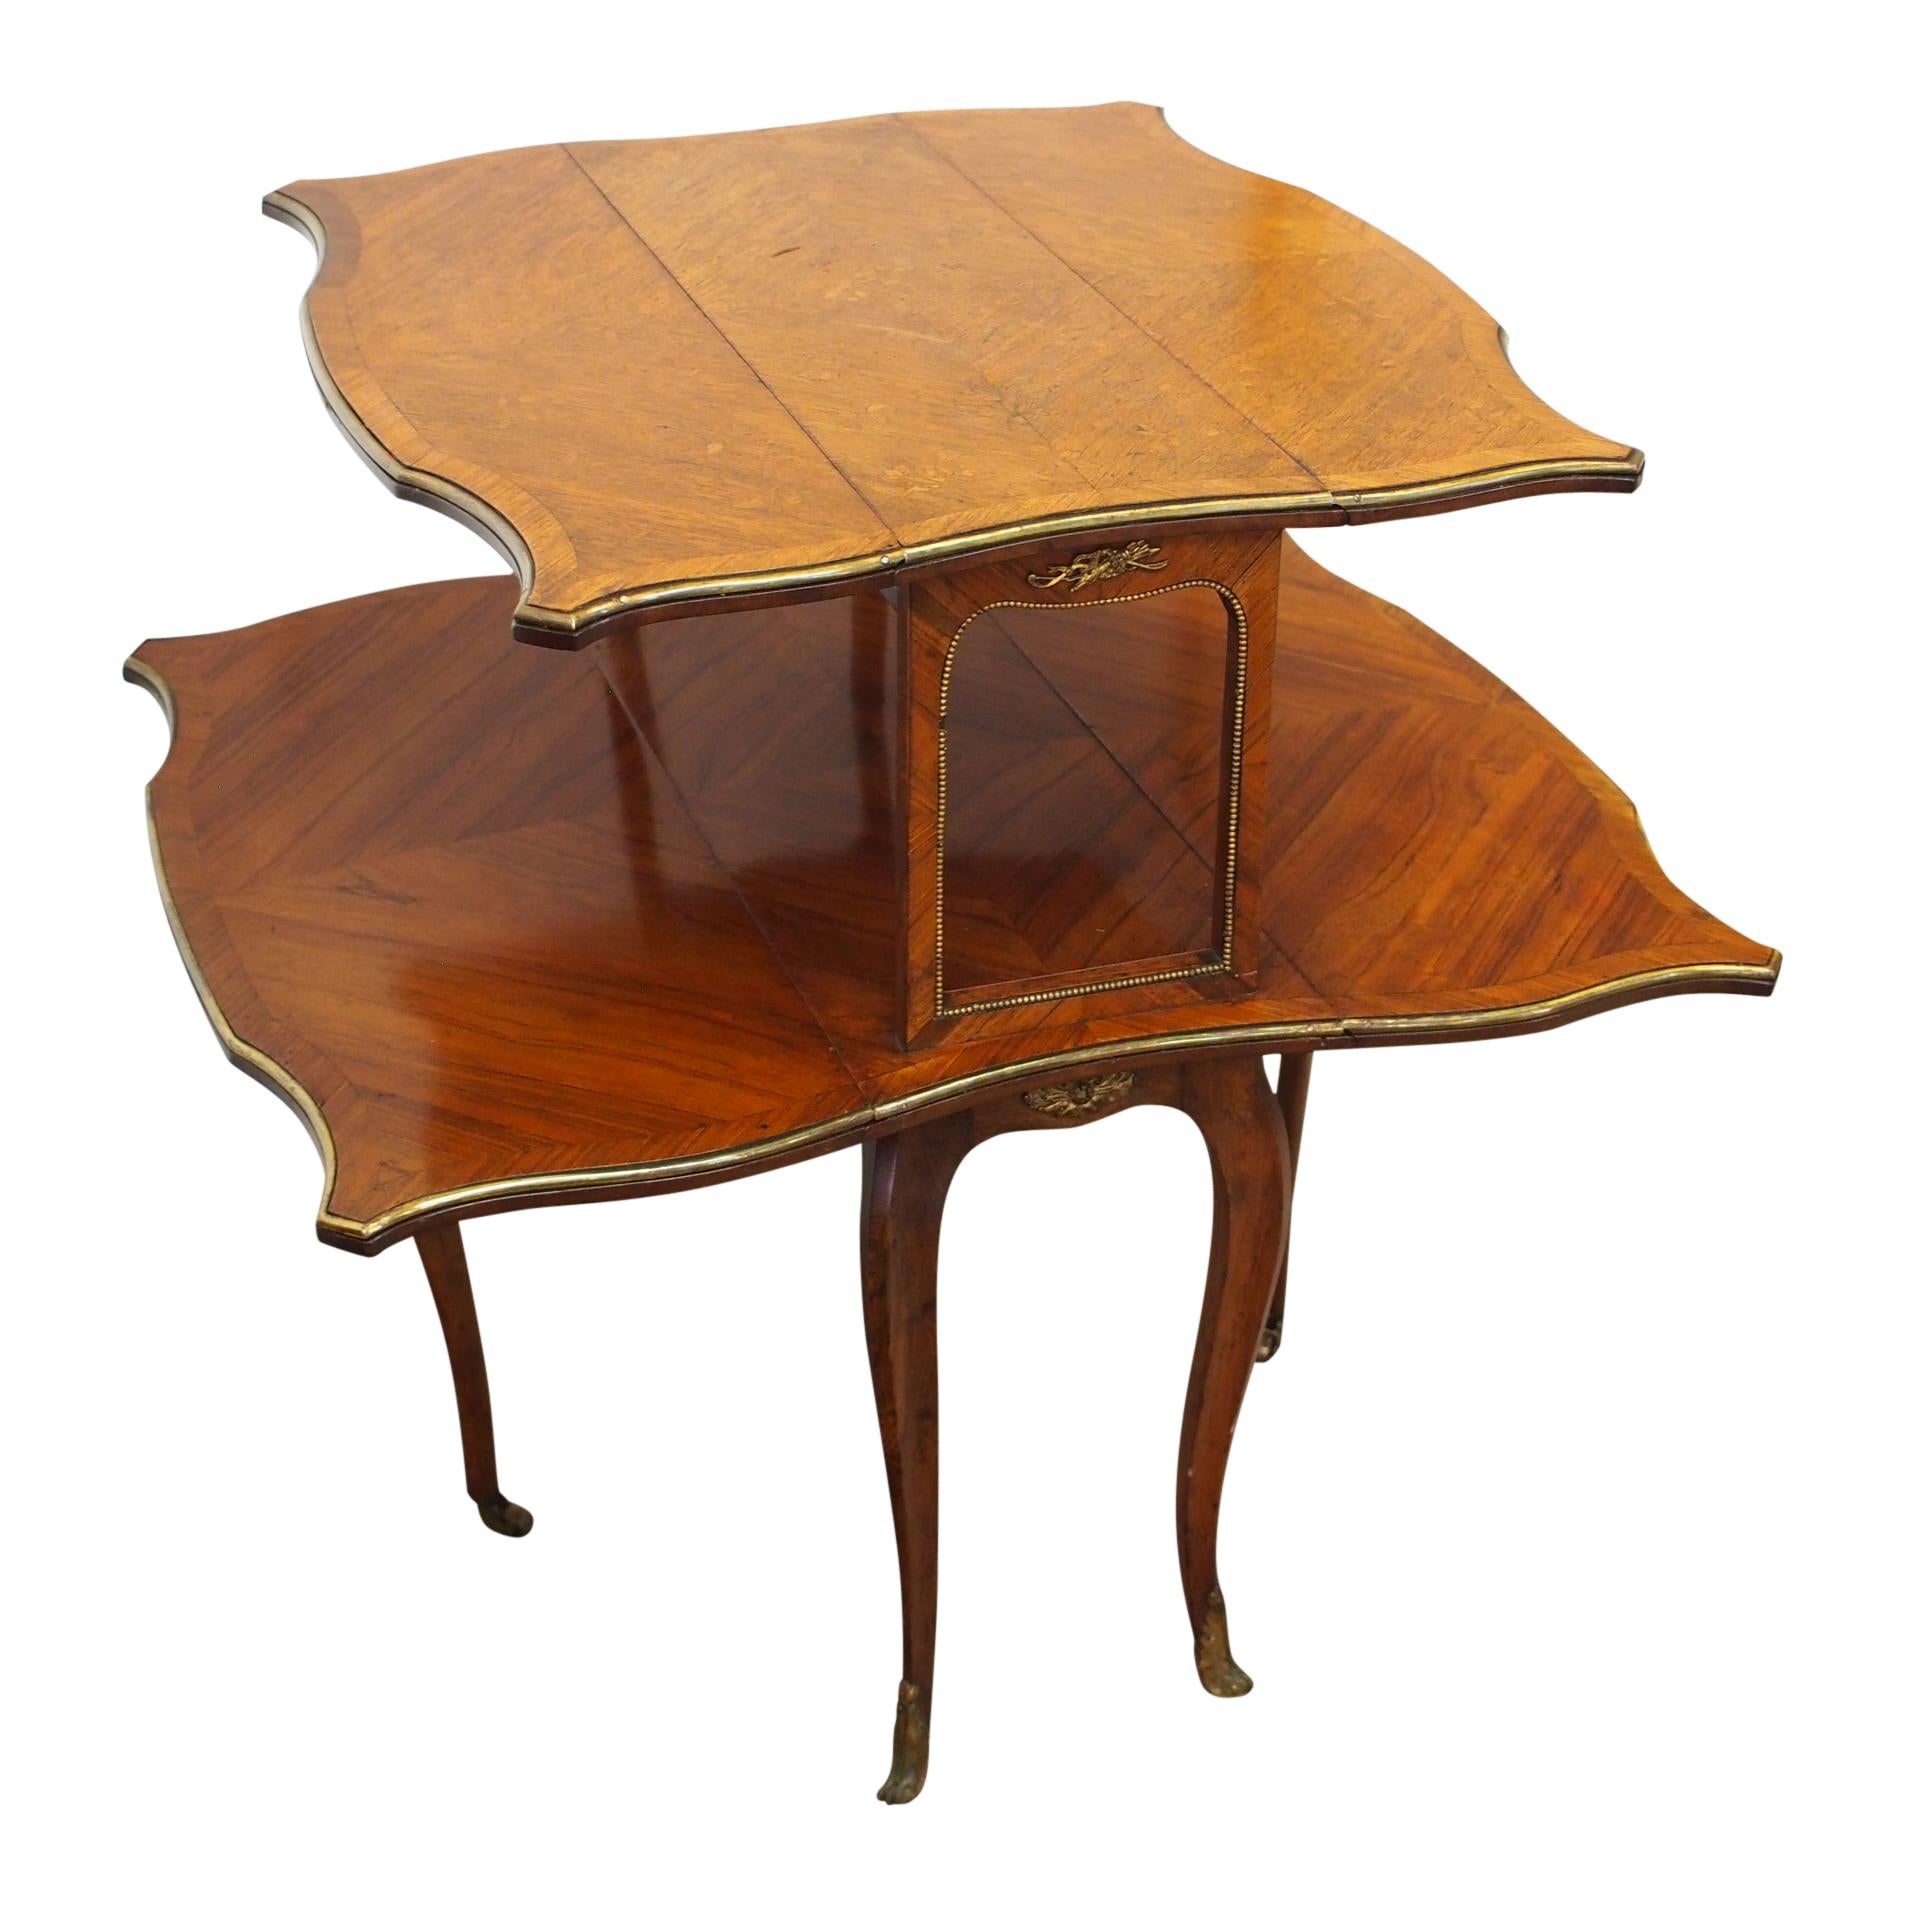 Exhibition quality, rare double Sutherland table or étagère by the famous cabinetmakers, Morison of Edinburgh, circa 1800. The serpentine shaped table flaps have profuse marquetry inlaid and figured walnut on the top layer and a rosewood lower